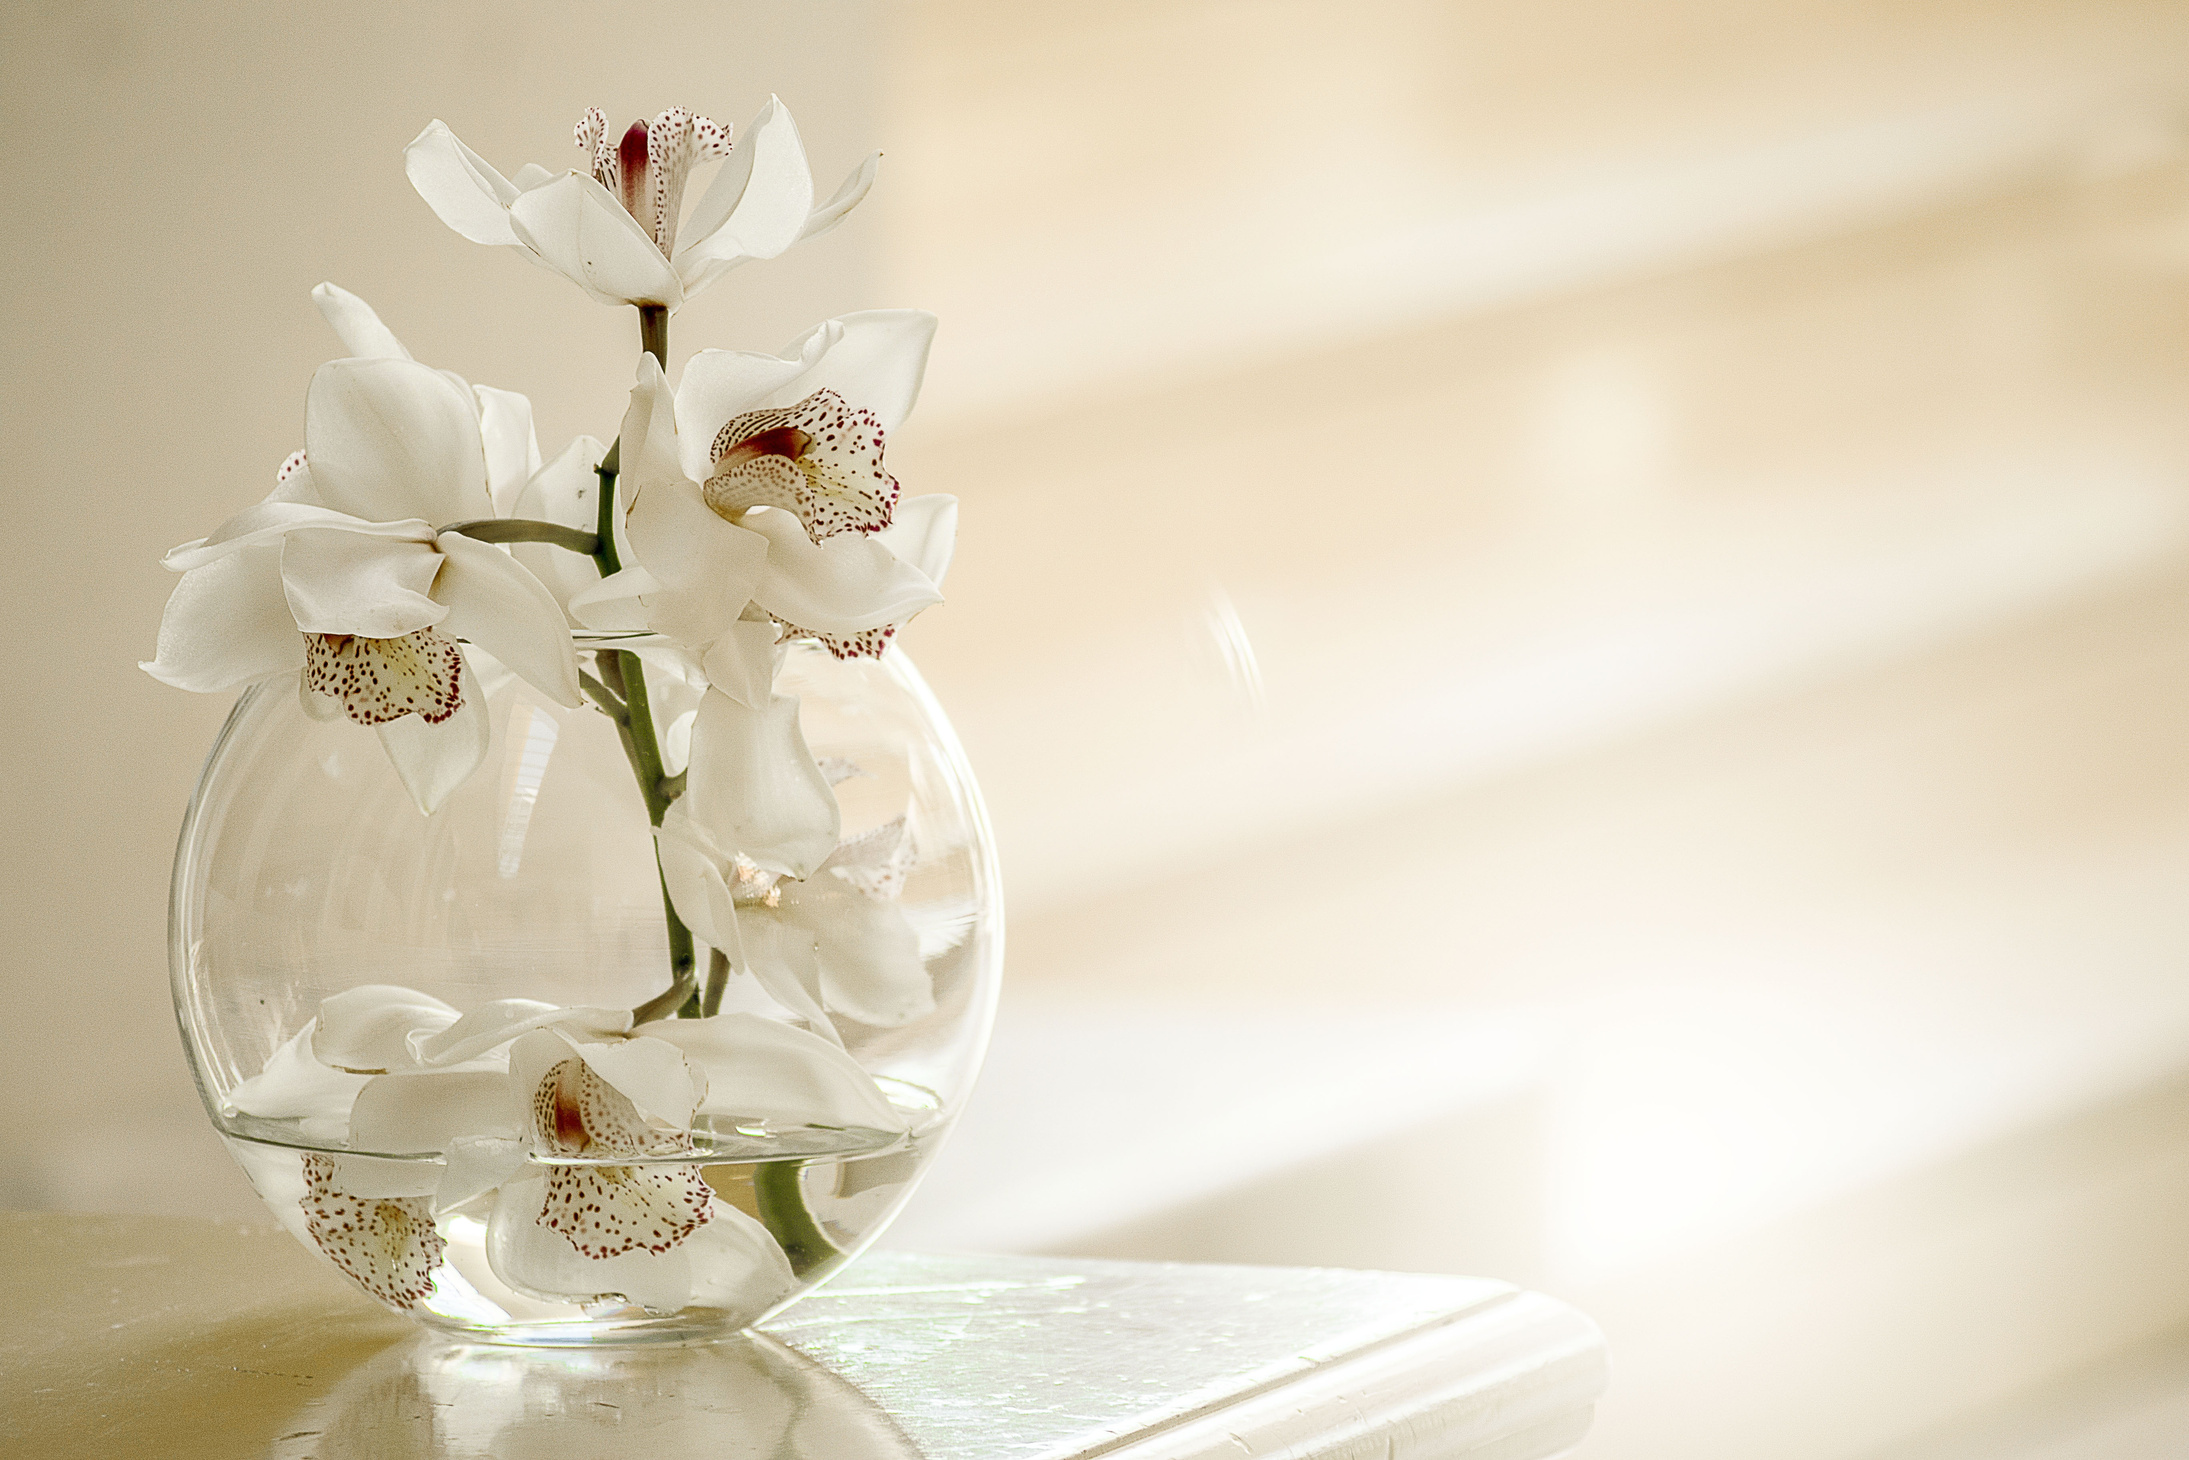 White Orchid Flower in a Vase